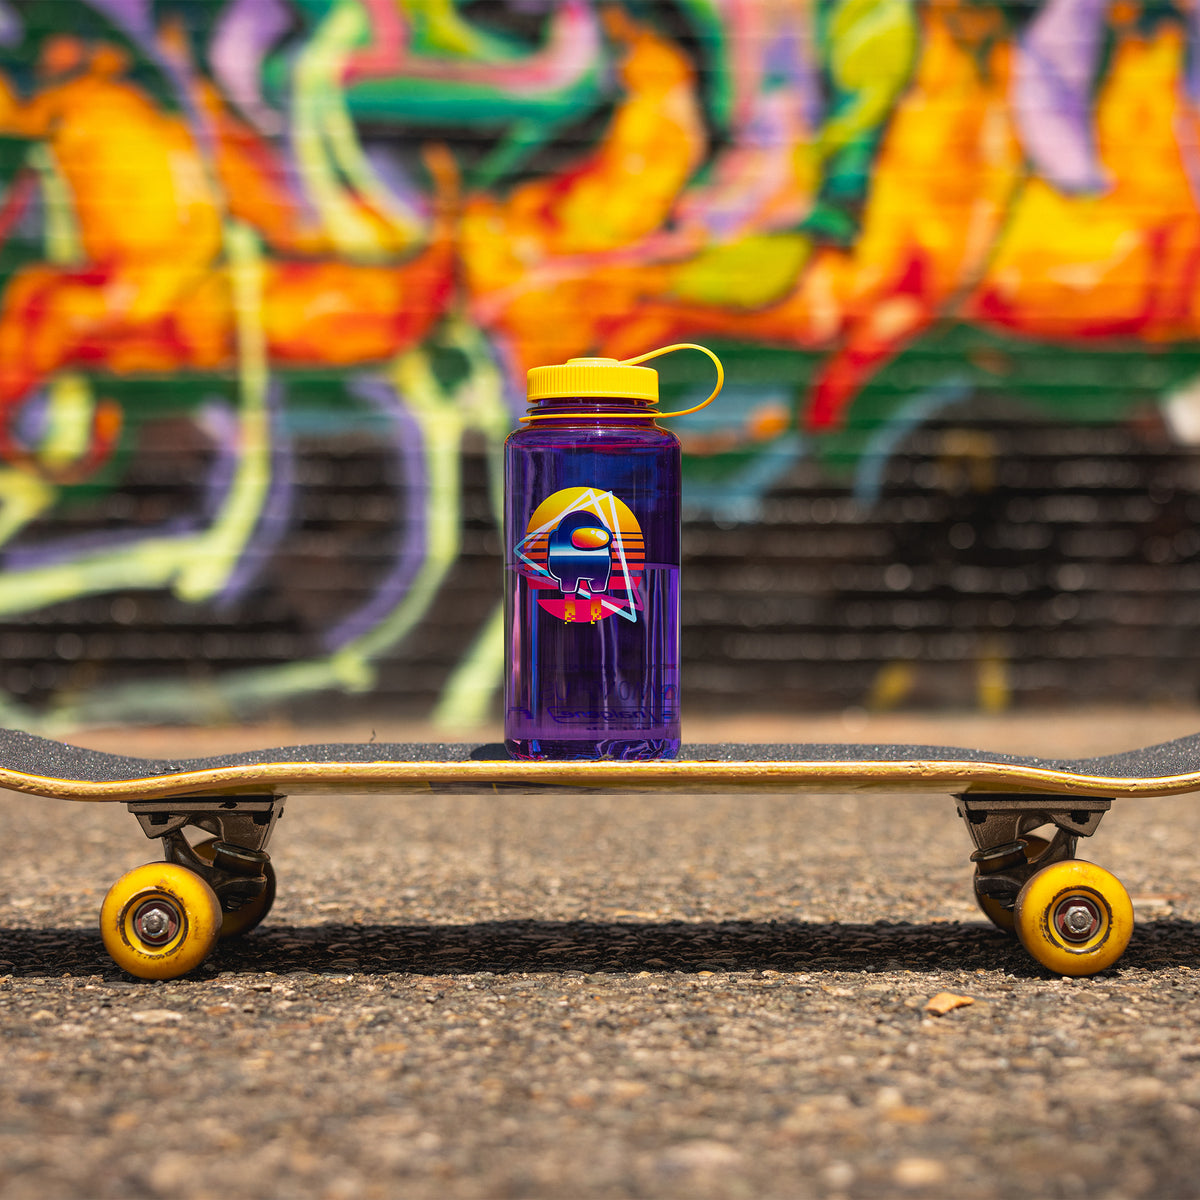 The Crewmate water bottle sitting on a skateboard.